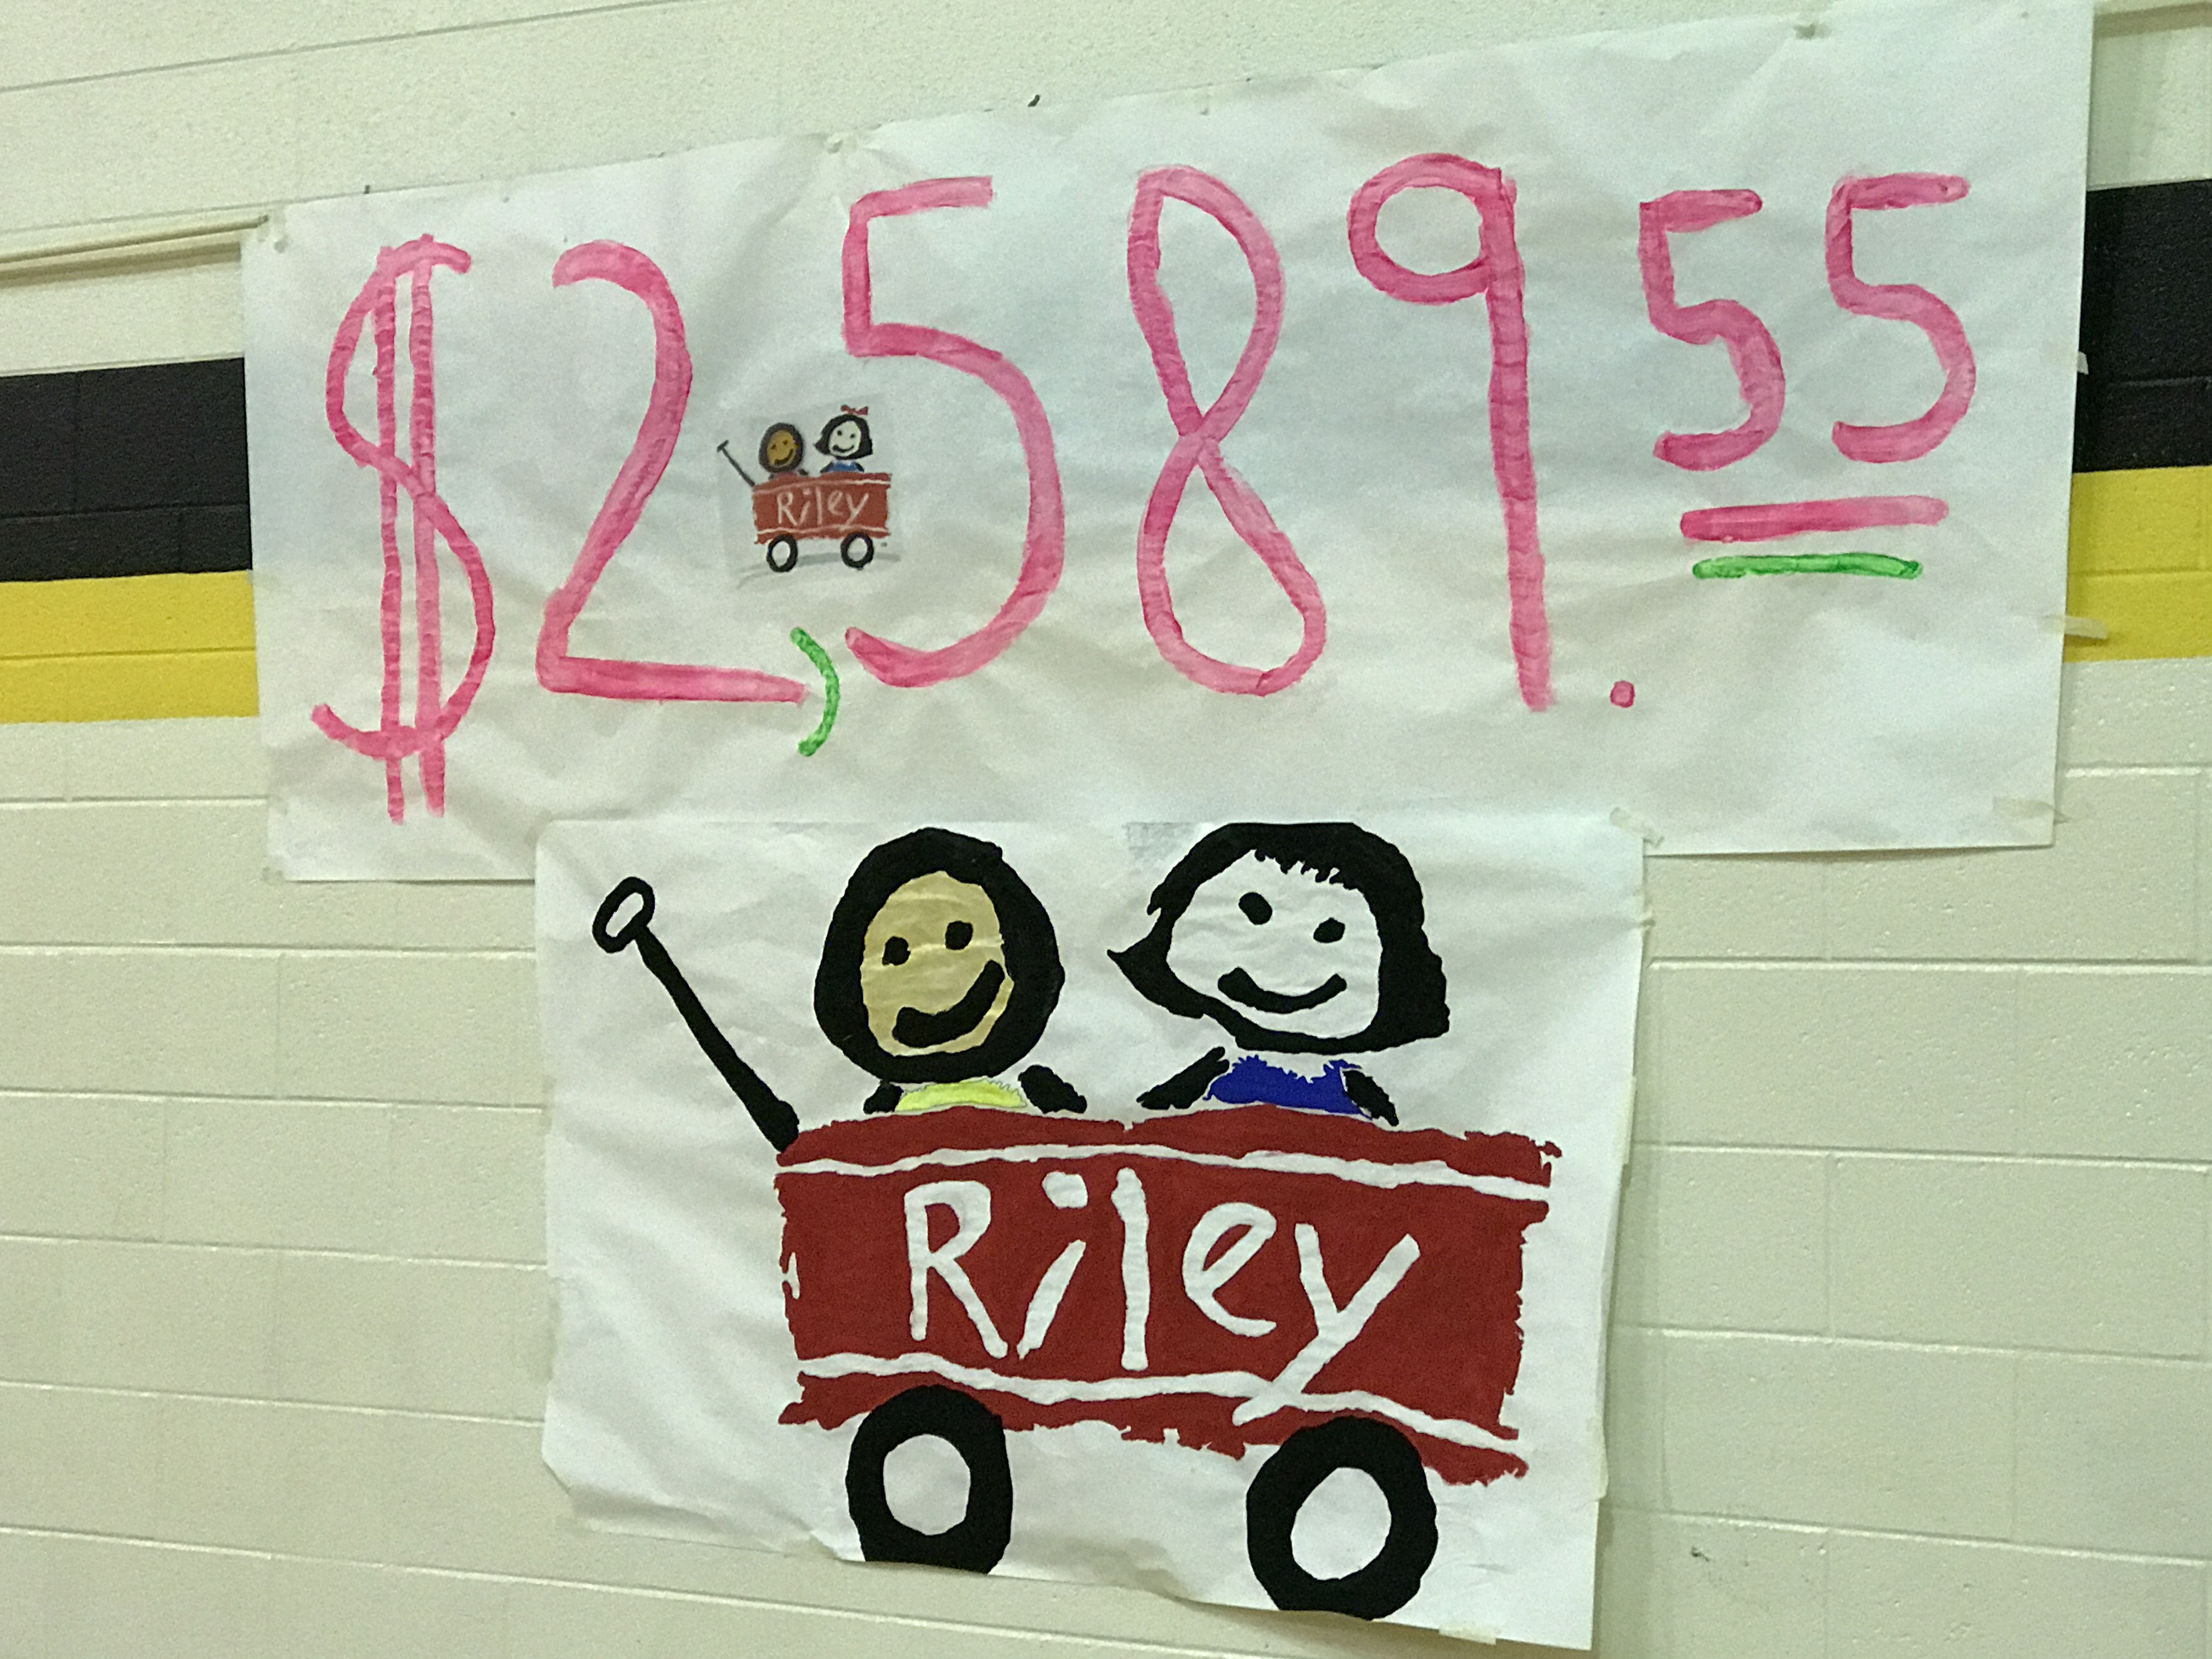 Thumbnail for the post titled: Akron Elementary collects $2,589 for Riley Children’s Foundation